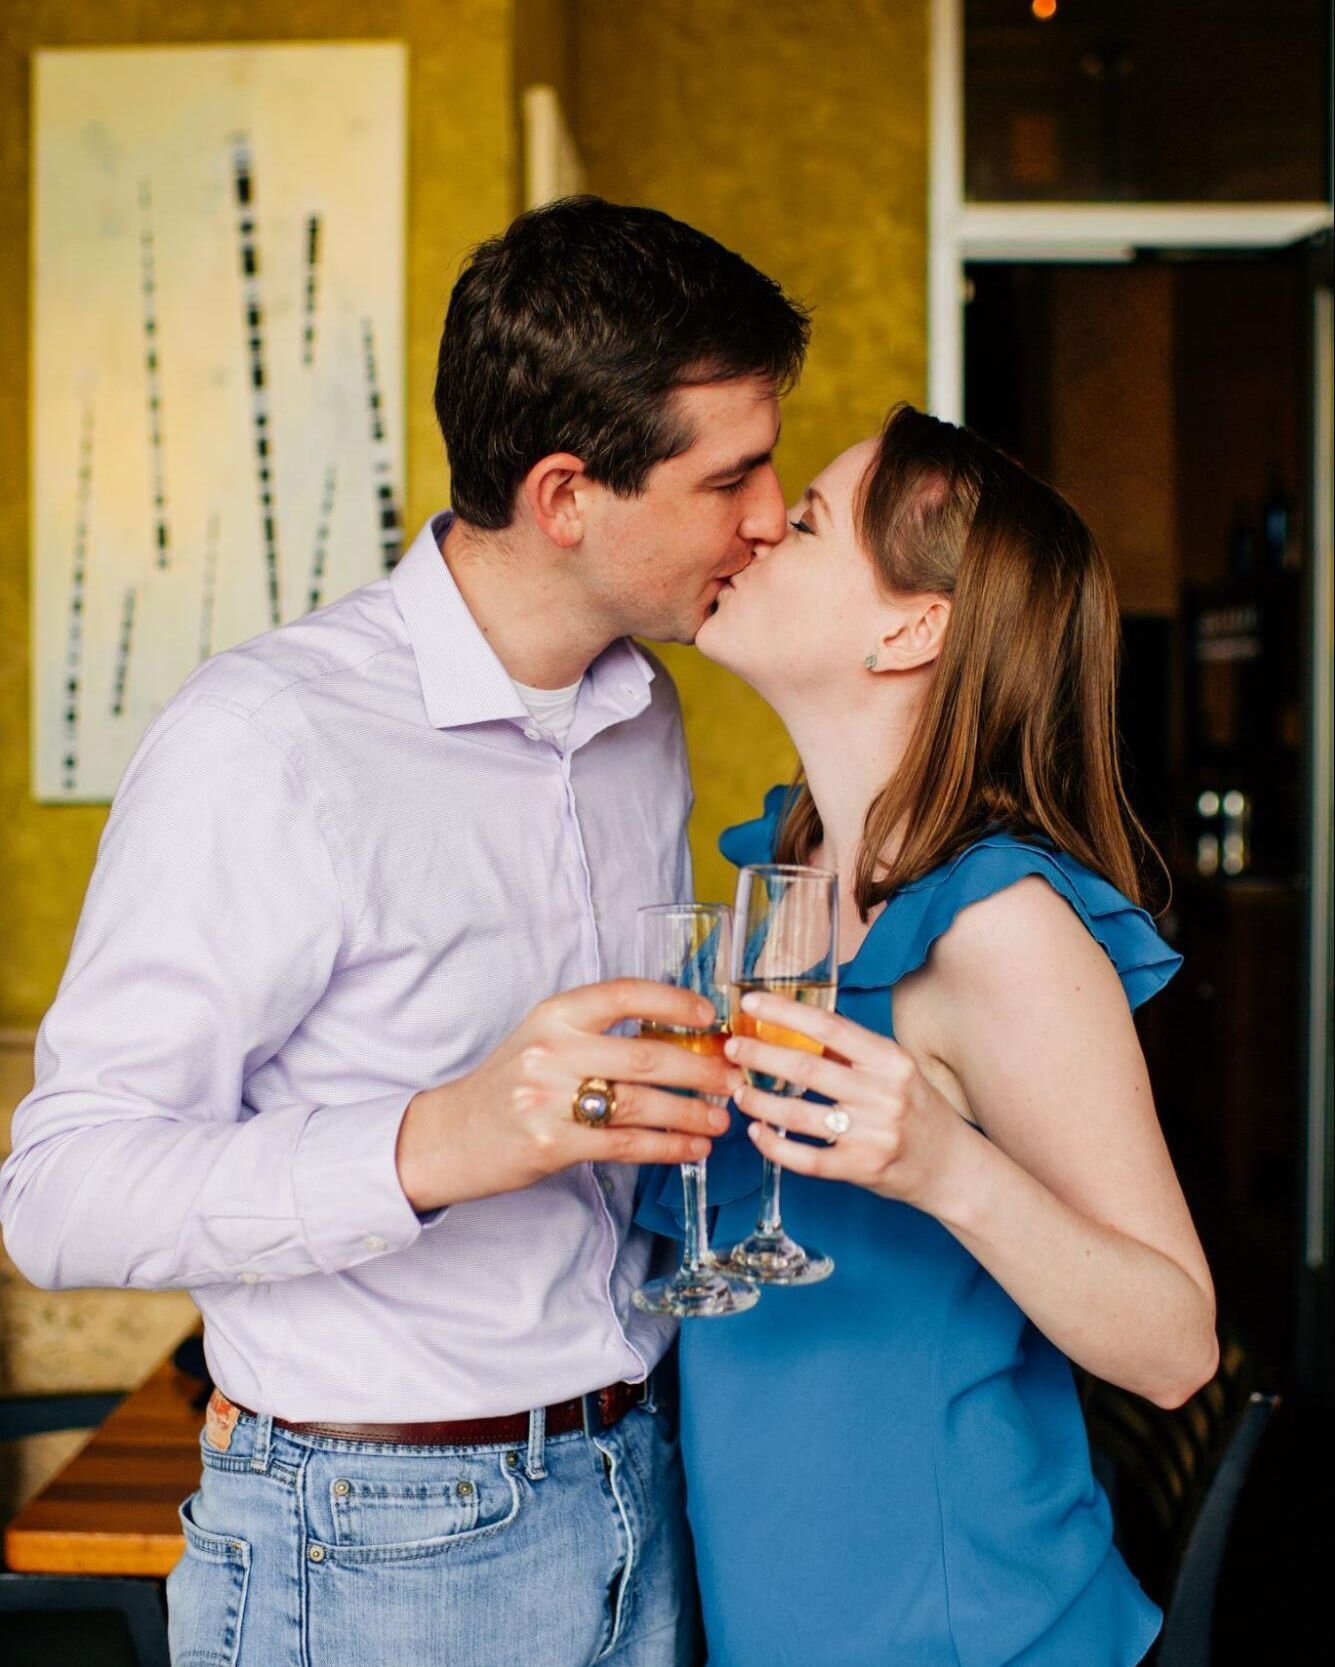 Love is in the &lsquo;fare&rsquo;. Cupid&rsquo;s struck The Woodlands with a 4 course Valentine&rsquo;s Day menu. Say &ldquo;I do&rdquo; to an intimate evening of bites and libations to share with your loved ones. 

Jasper&rsquo;s will be open from 4